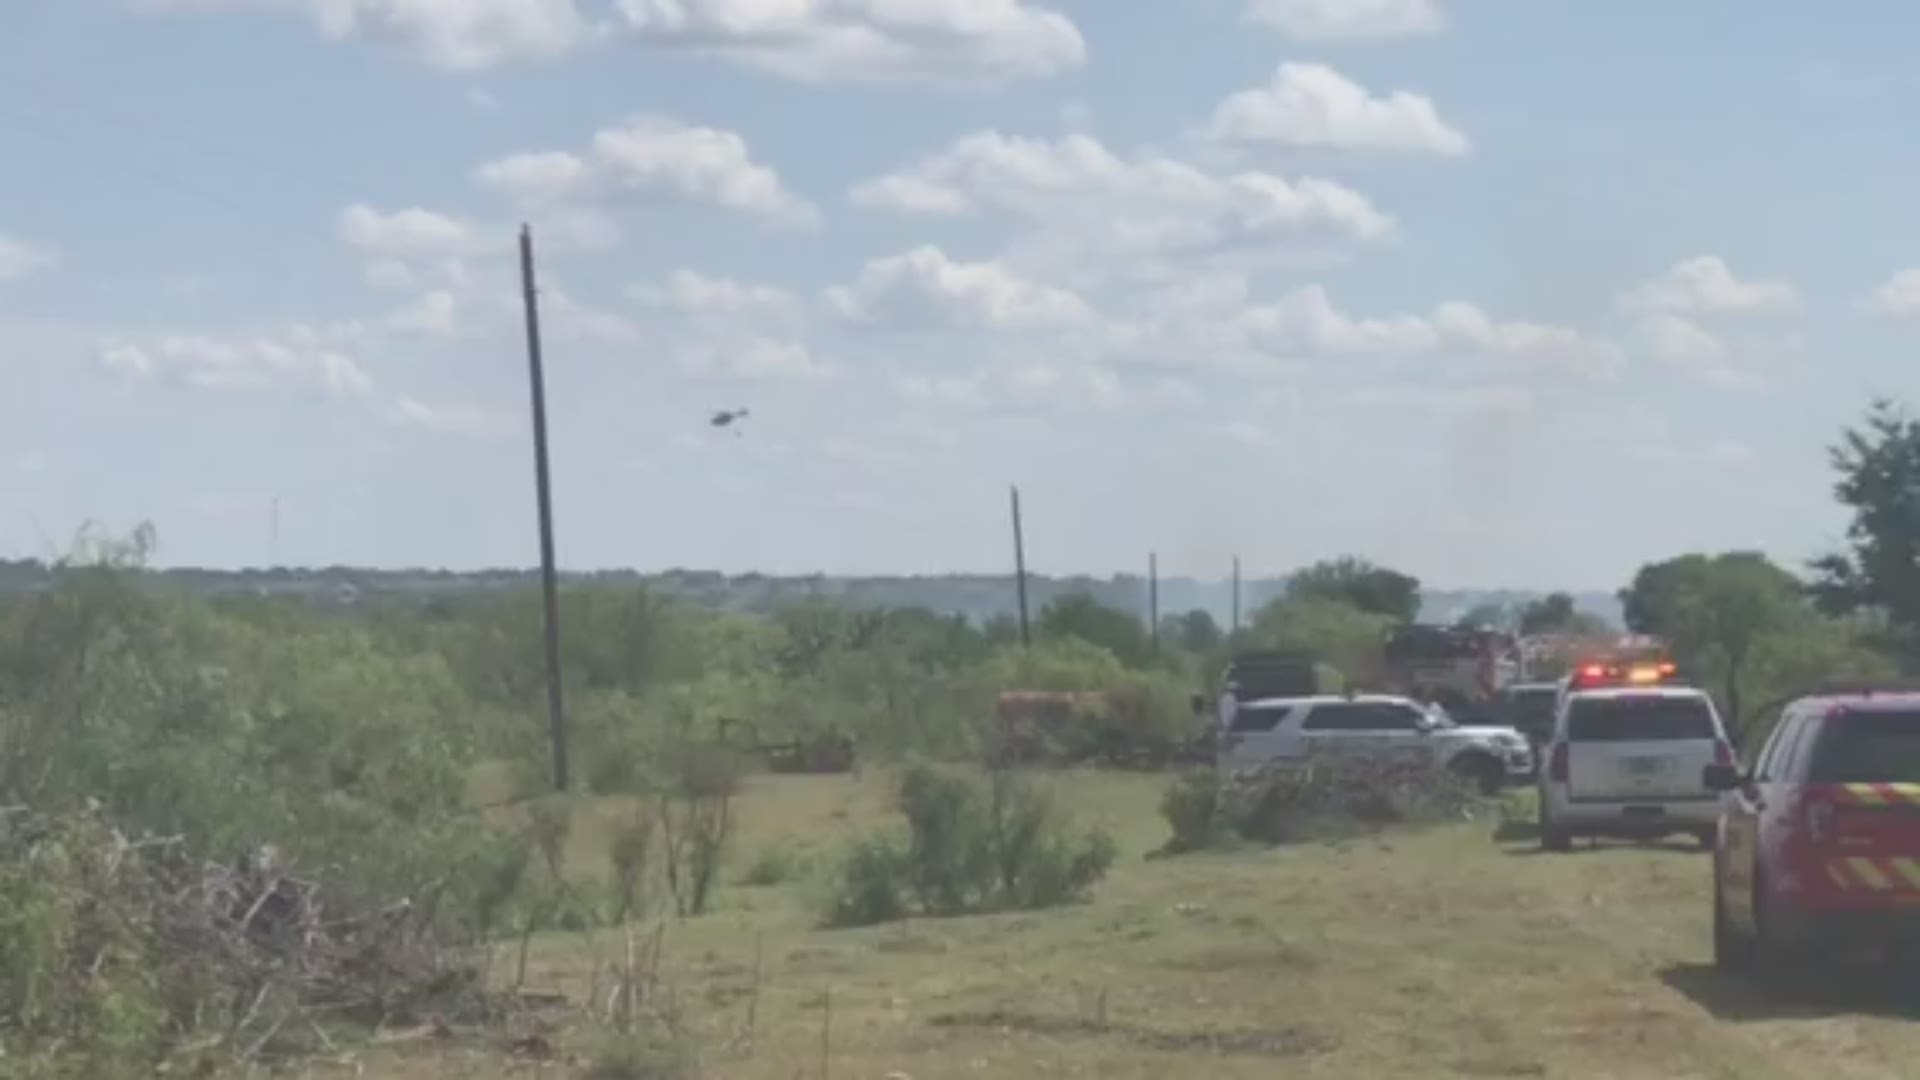 The Austin and Manor Fire Departments, along with STAR Flight, responded to a large brush fire near Manor on Sunday.